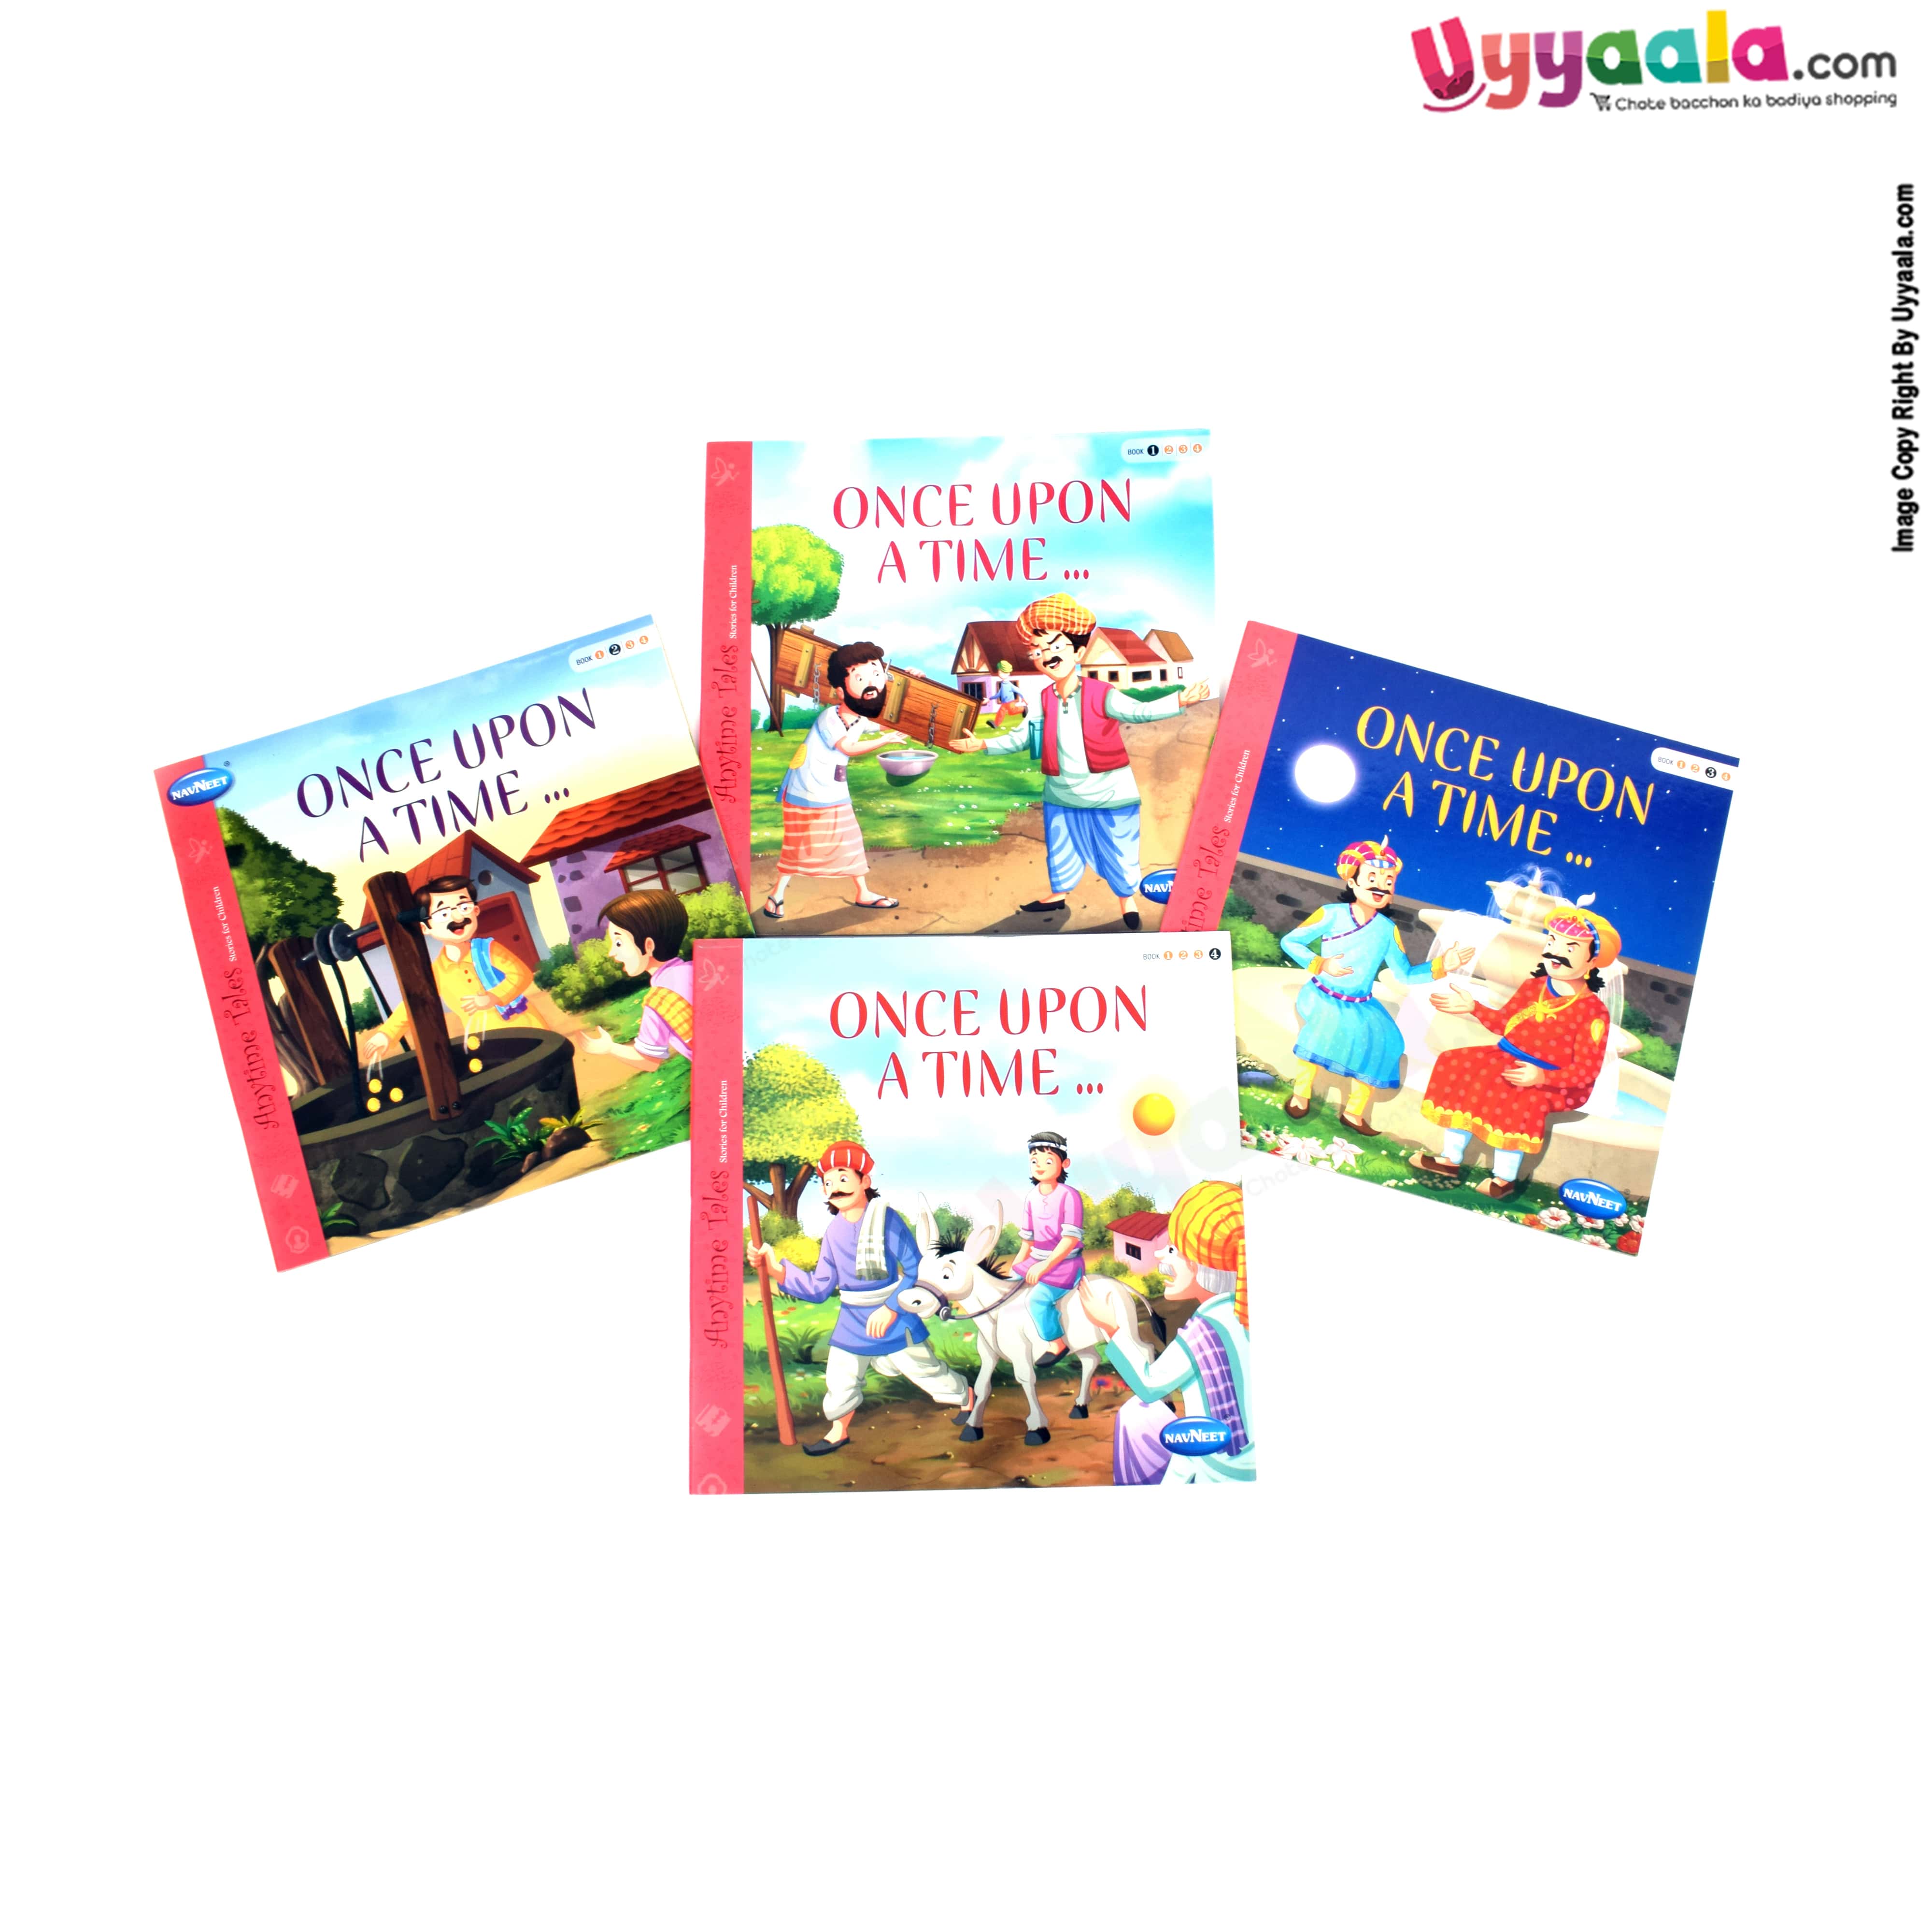 NAVNEET any time tales stories for children, once upon a time Pack of 4 - 4 volumes